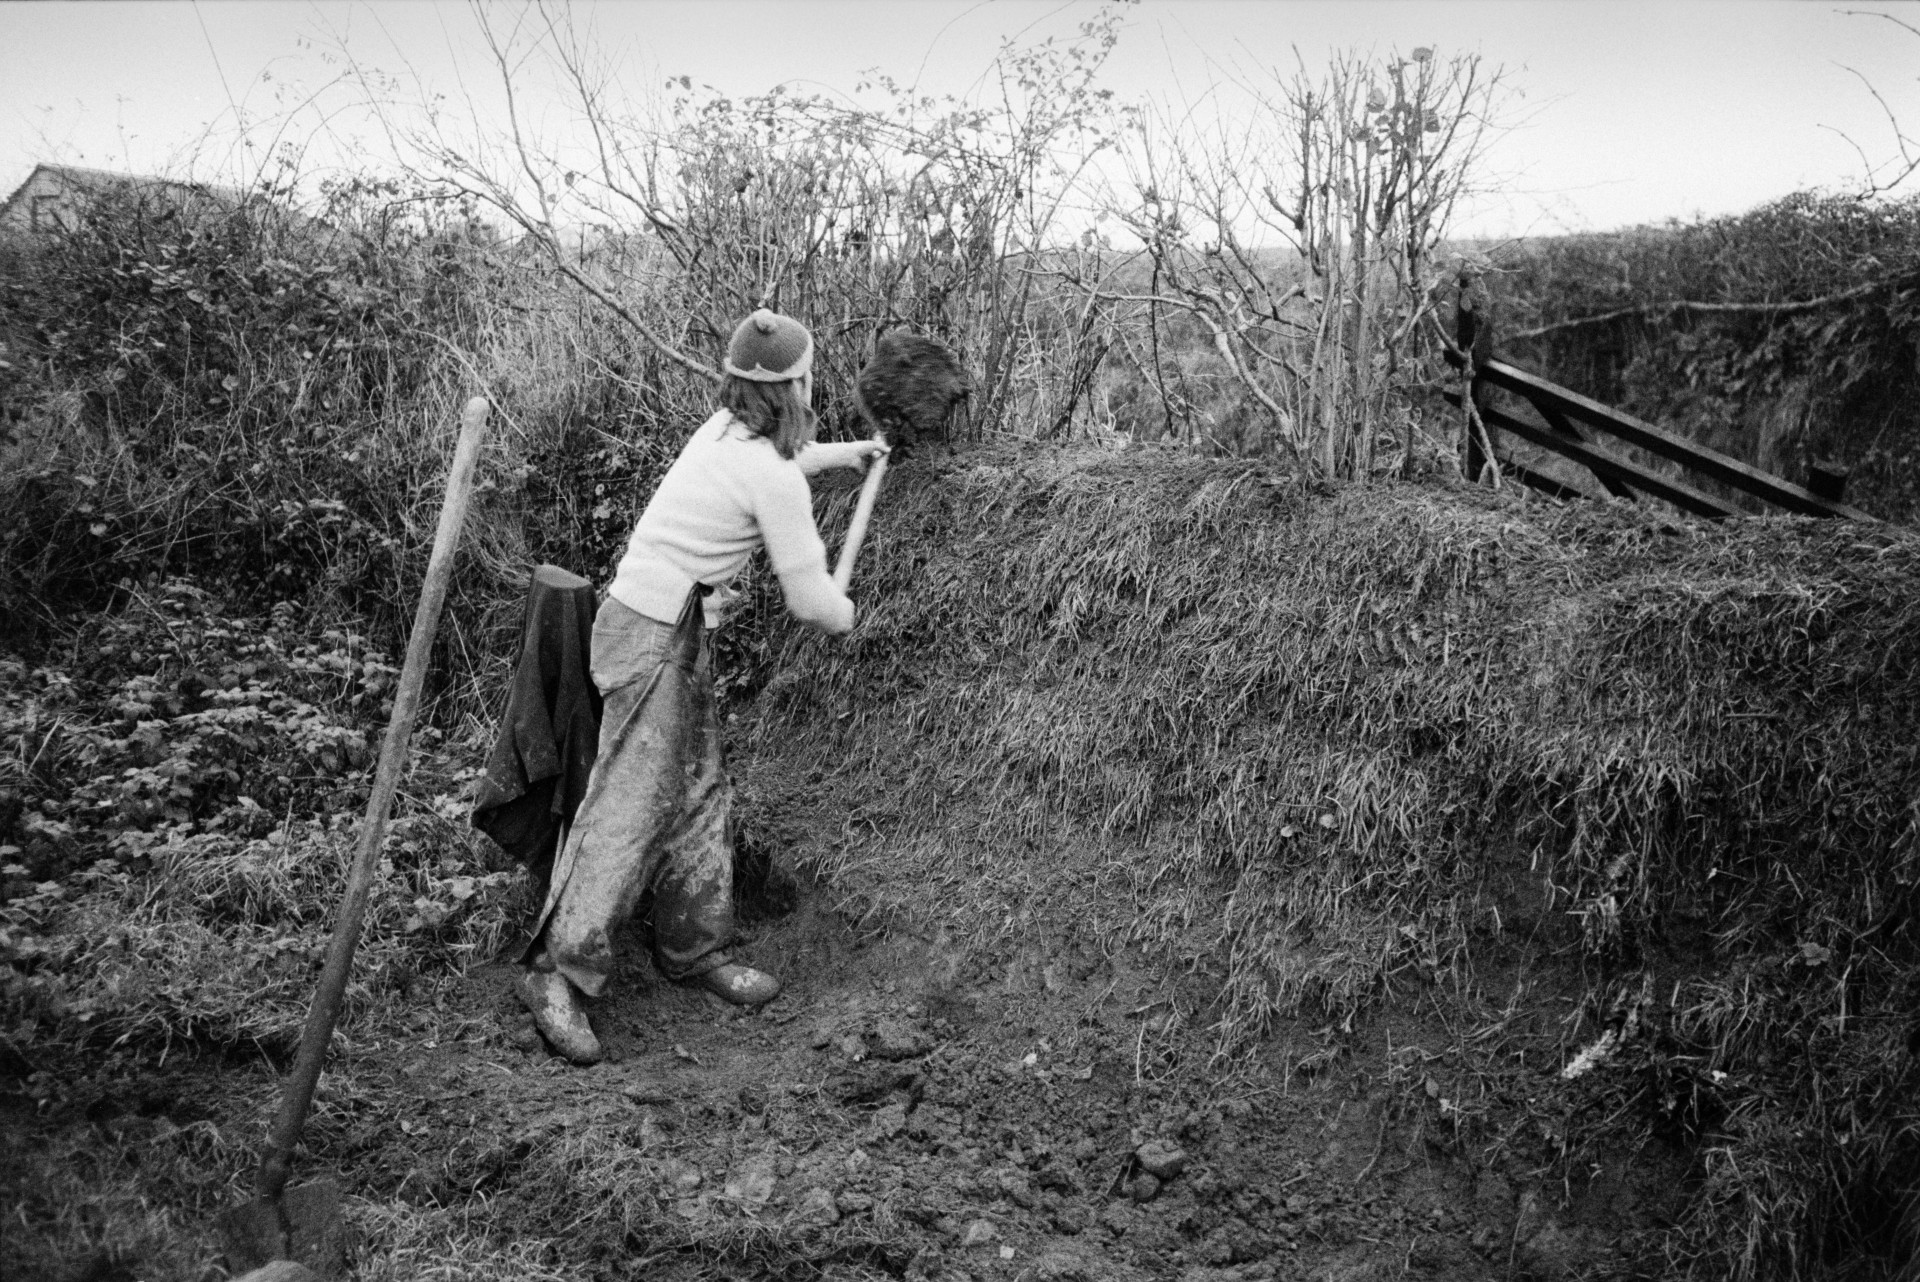 Derek Bright clatting, or building up hedge bank with turf in a field at Mill Road Farm, Beaford. The farm was also known as Jeffrys.